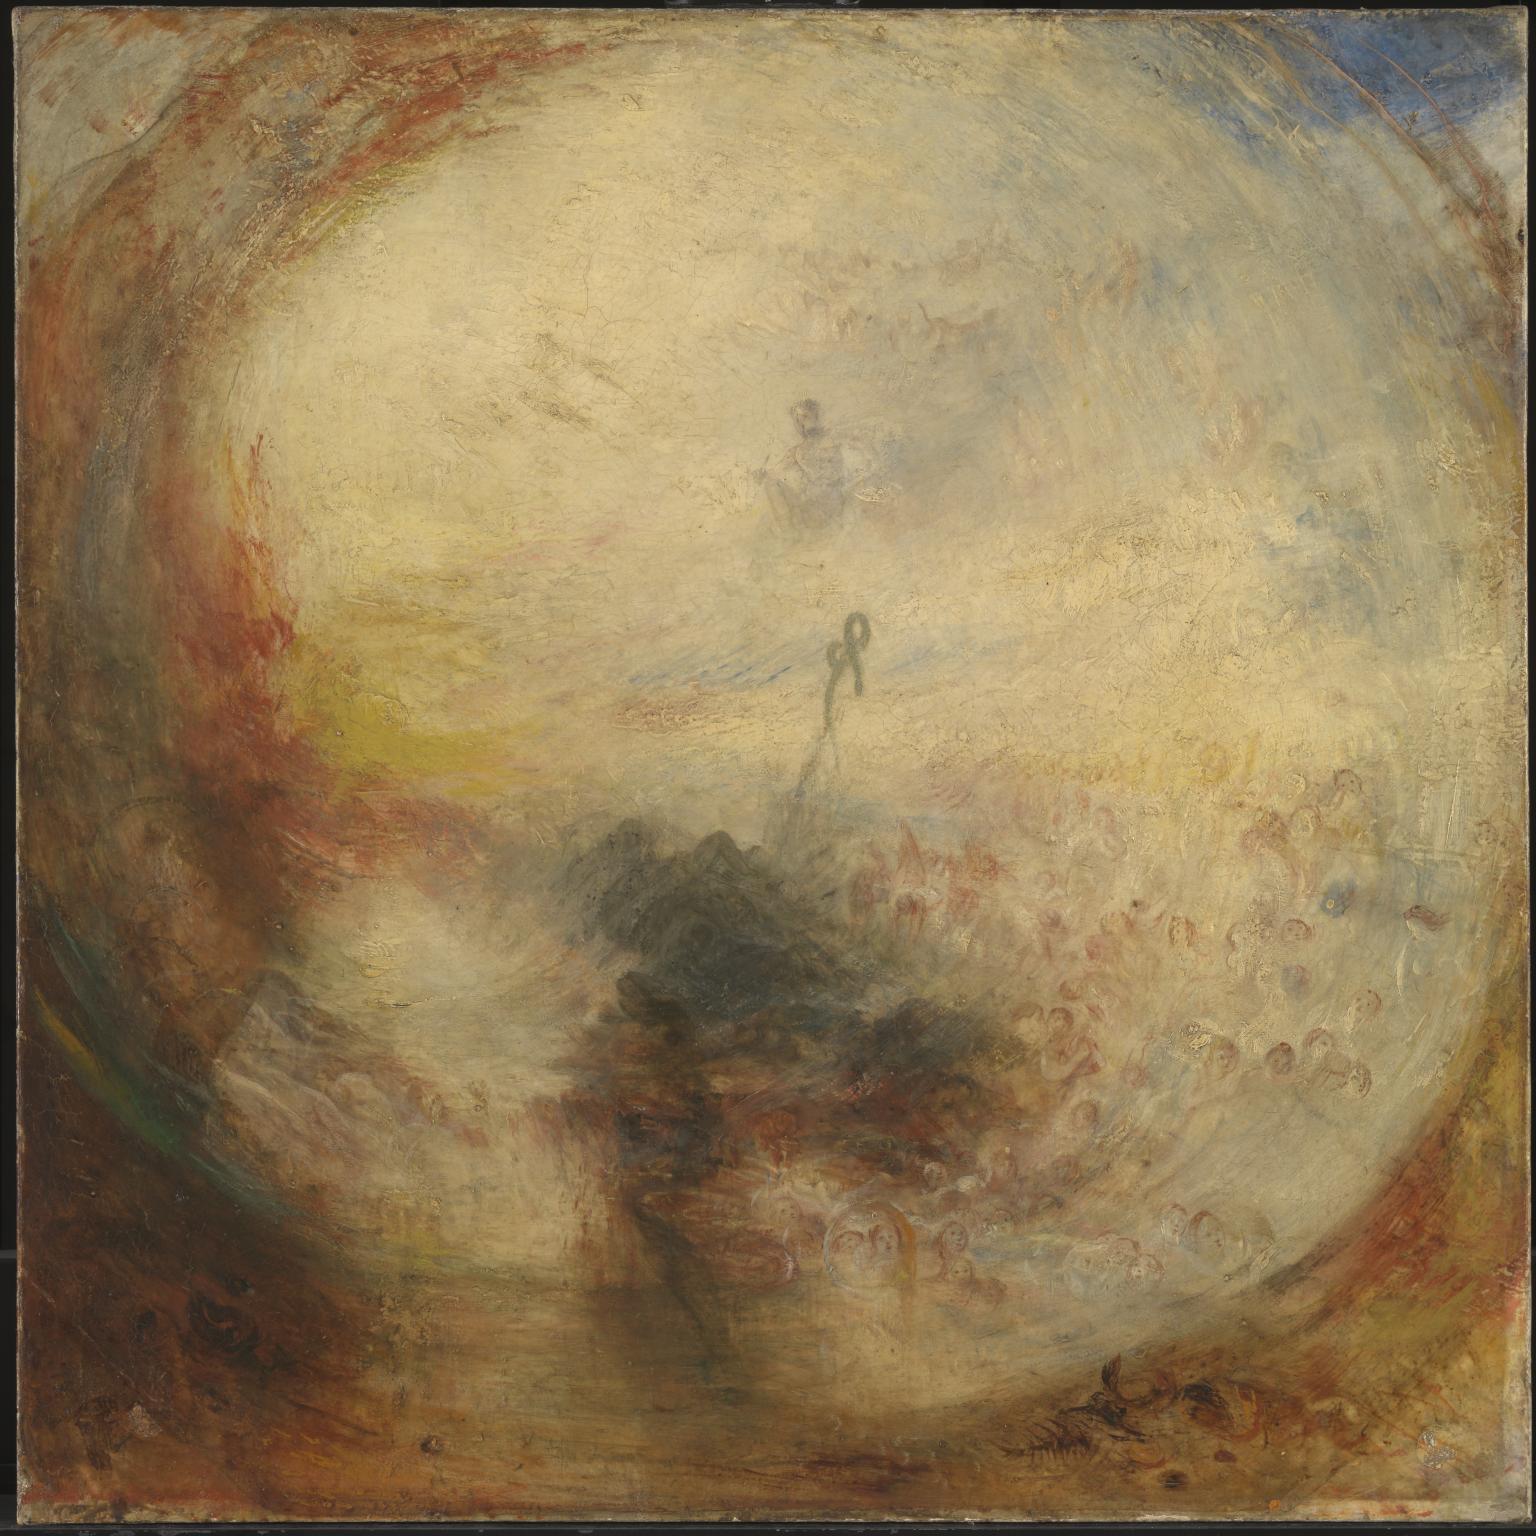 Light and Colour by Joseph Mallord William Turner - 1843 - 787 x 787 cm Tate Modern